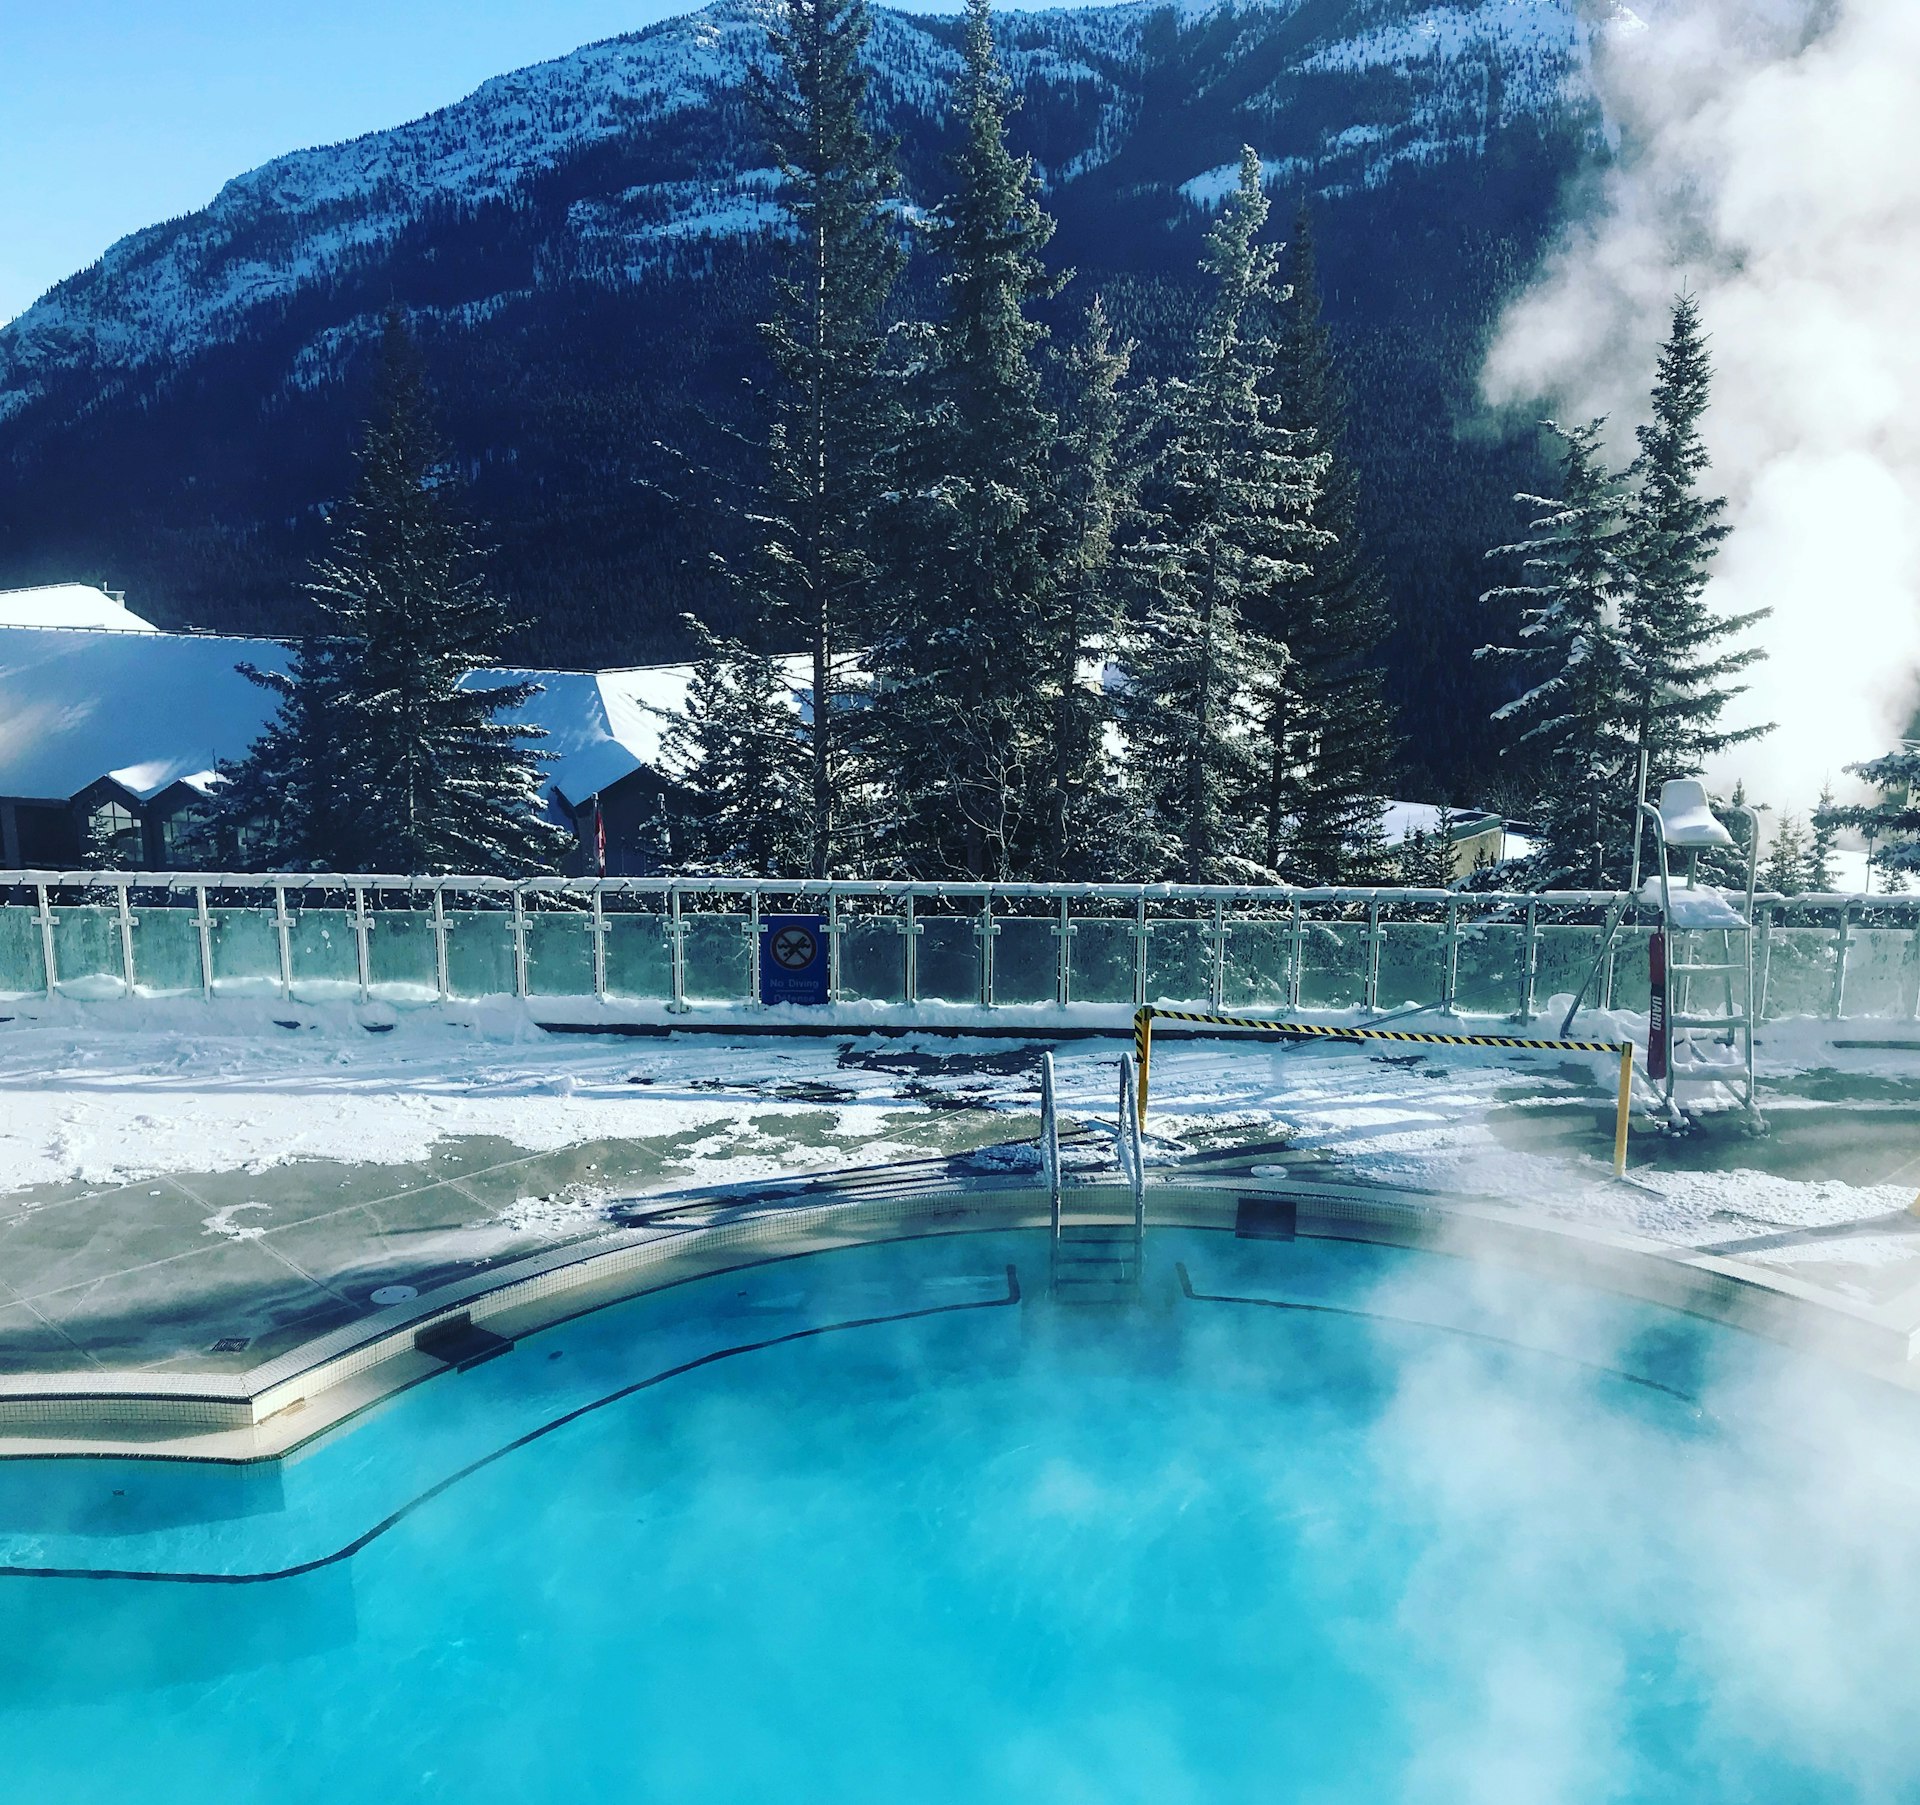 A steaming hot pool overlooking a snowy mountain range at Banff Upper Hot Springs